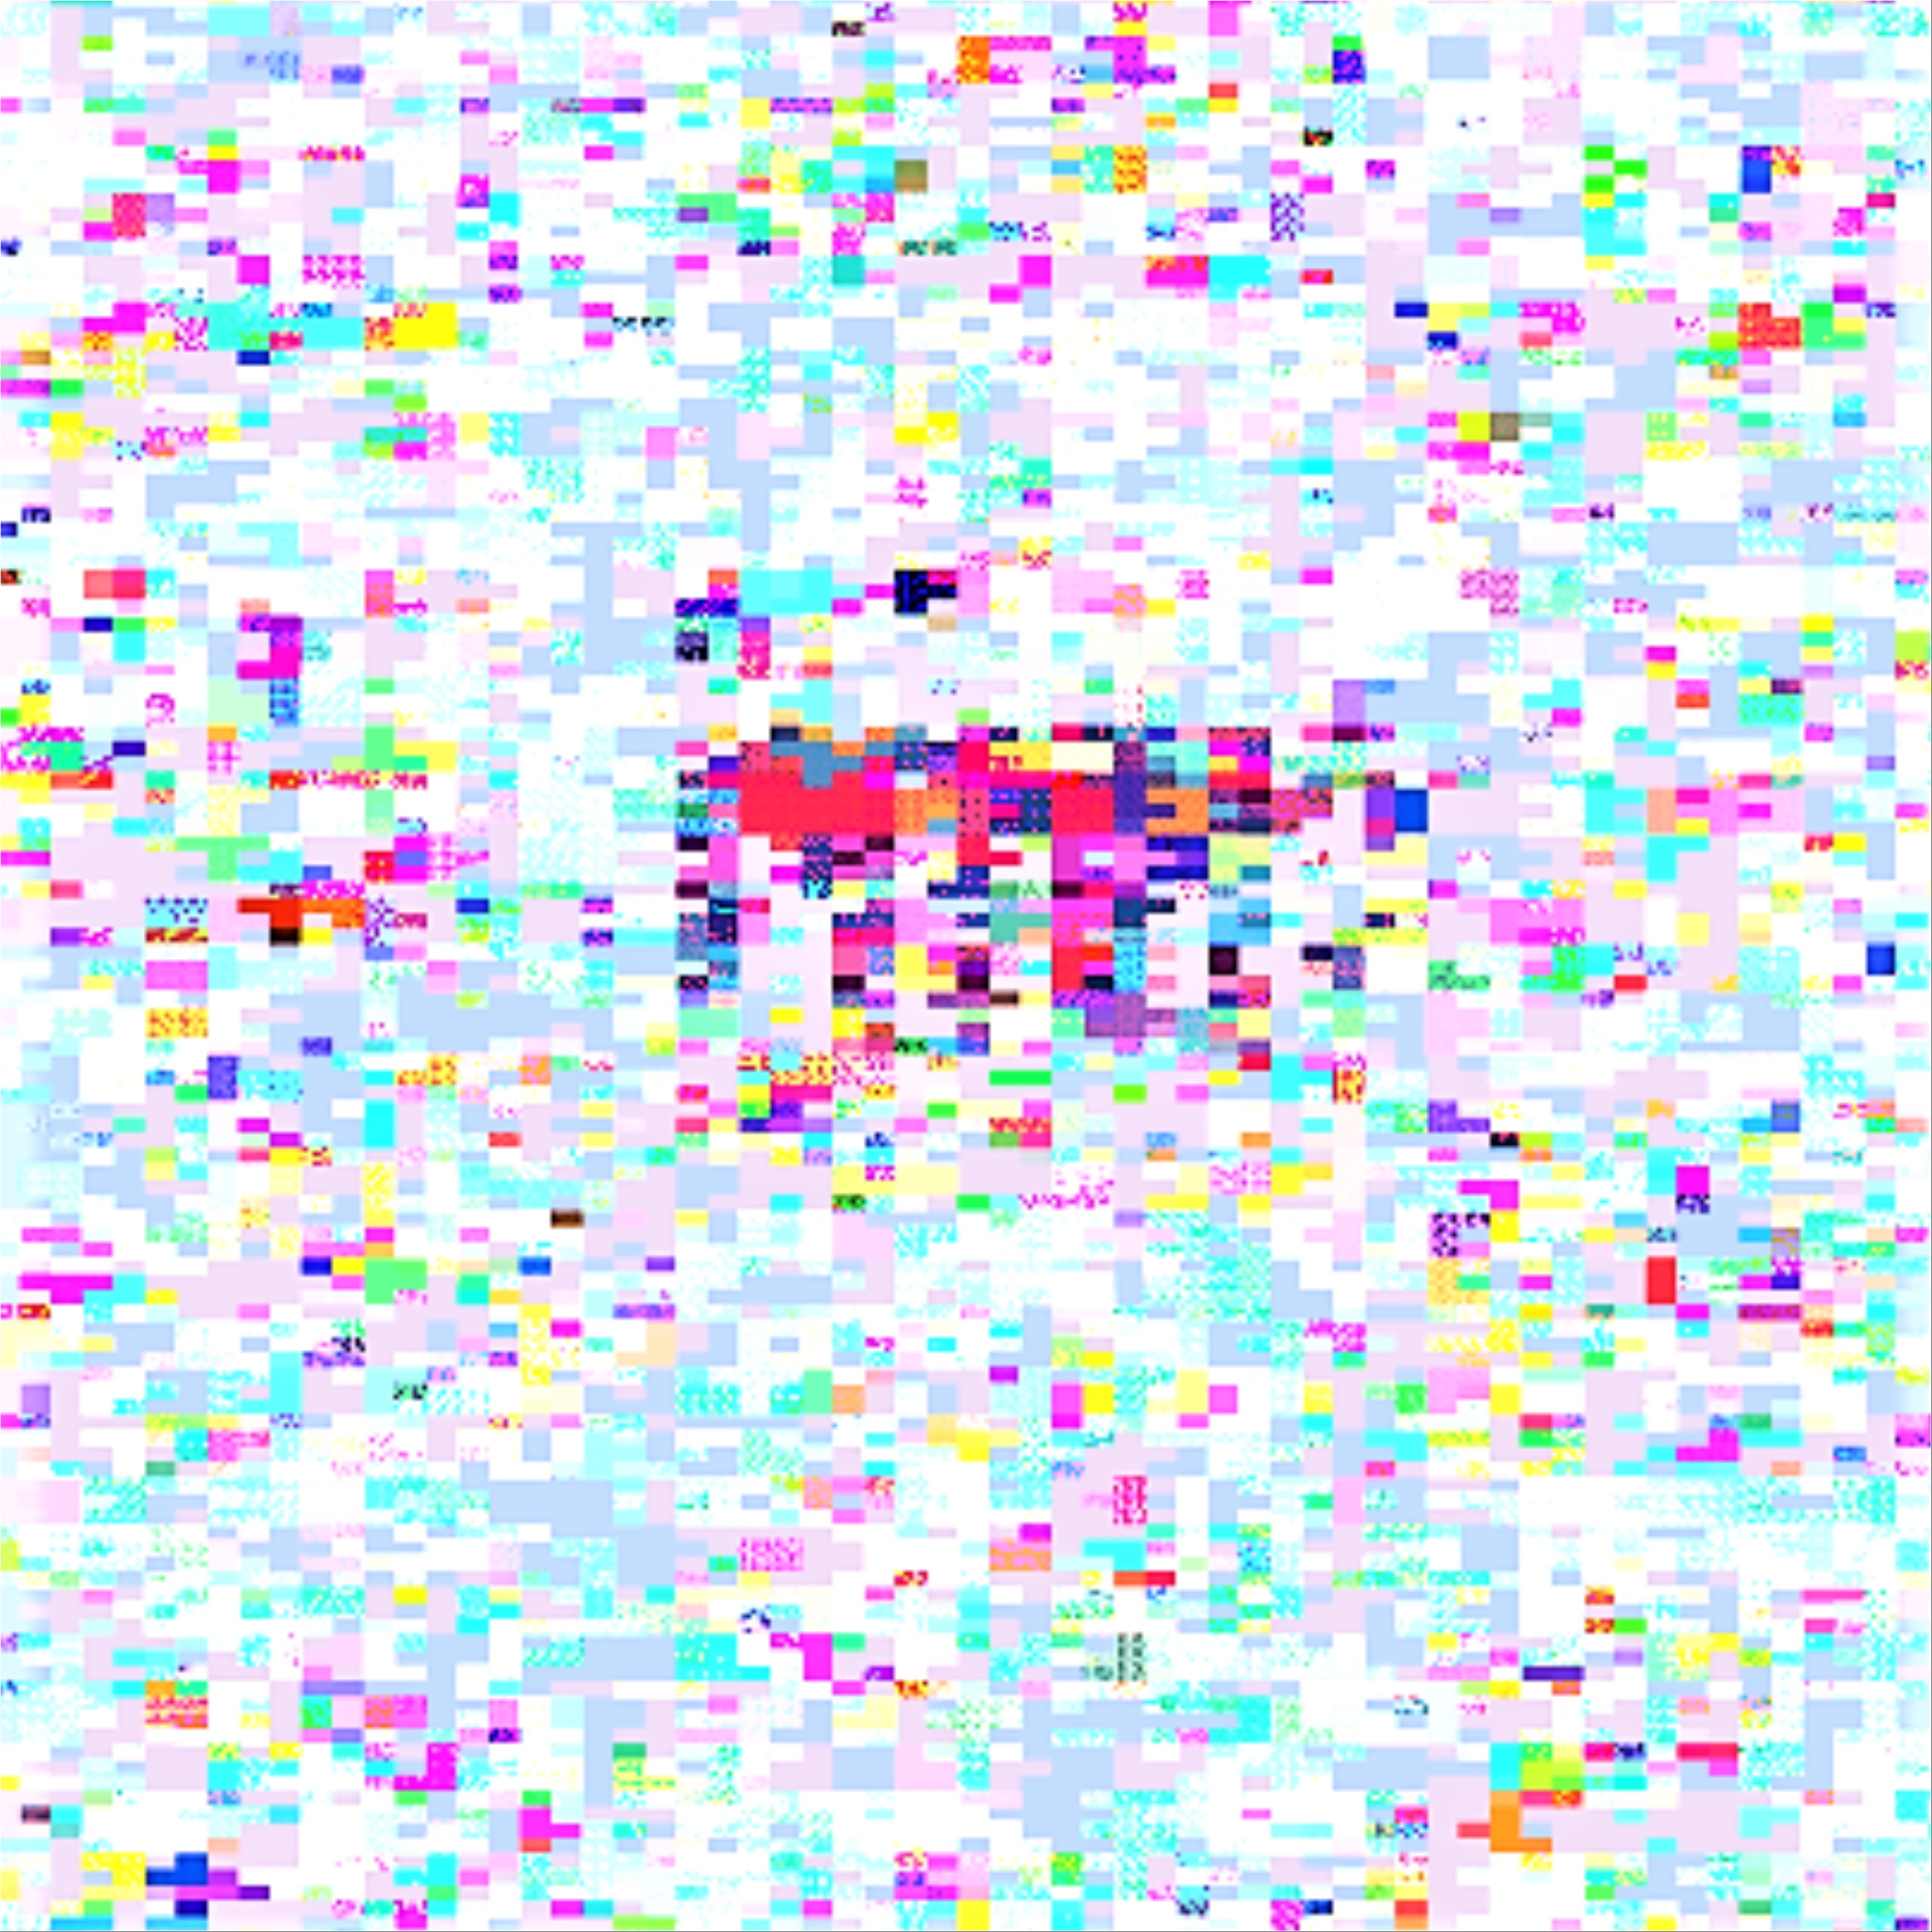 Operational Glitch Abstraction II